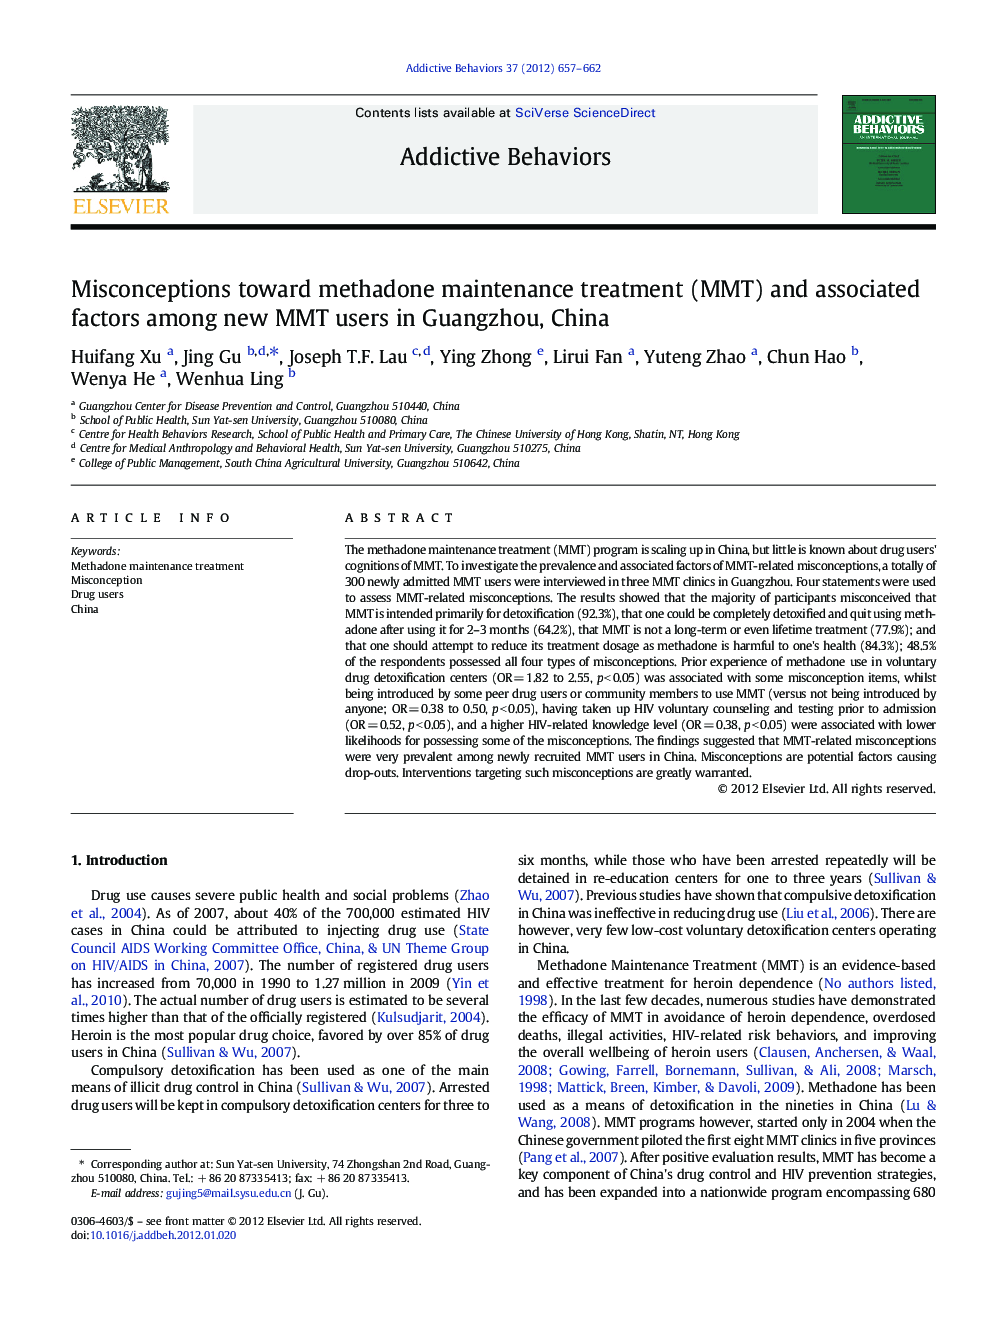 Misconceptions toward methadone maintenance treatment (MMT) and associated factors among new MMT users in Guangzhou, China